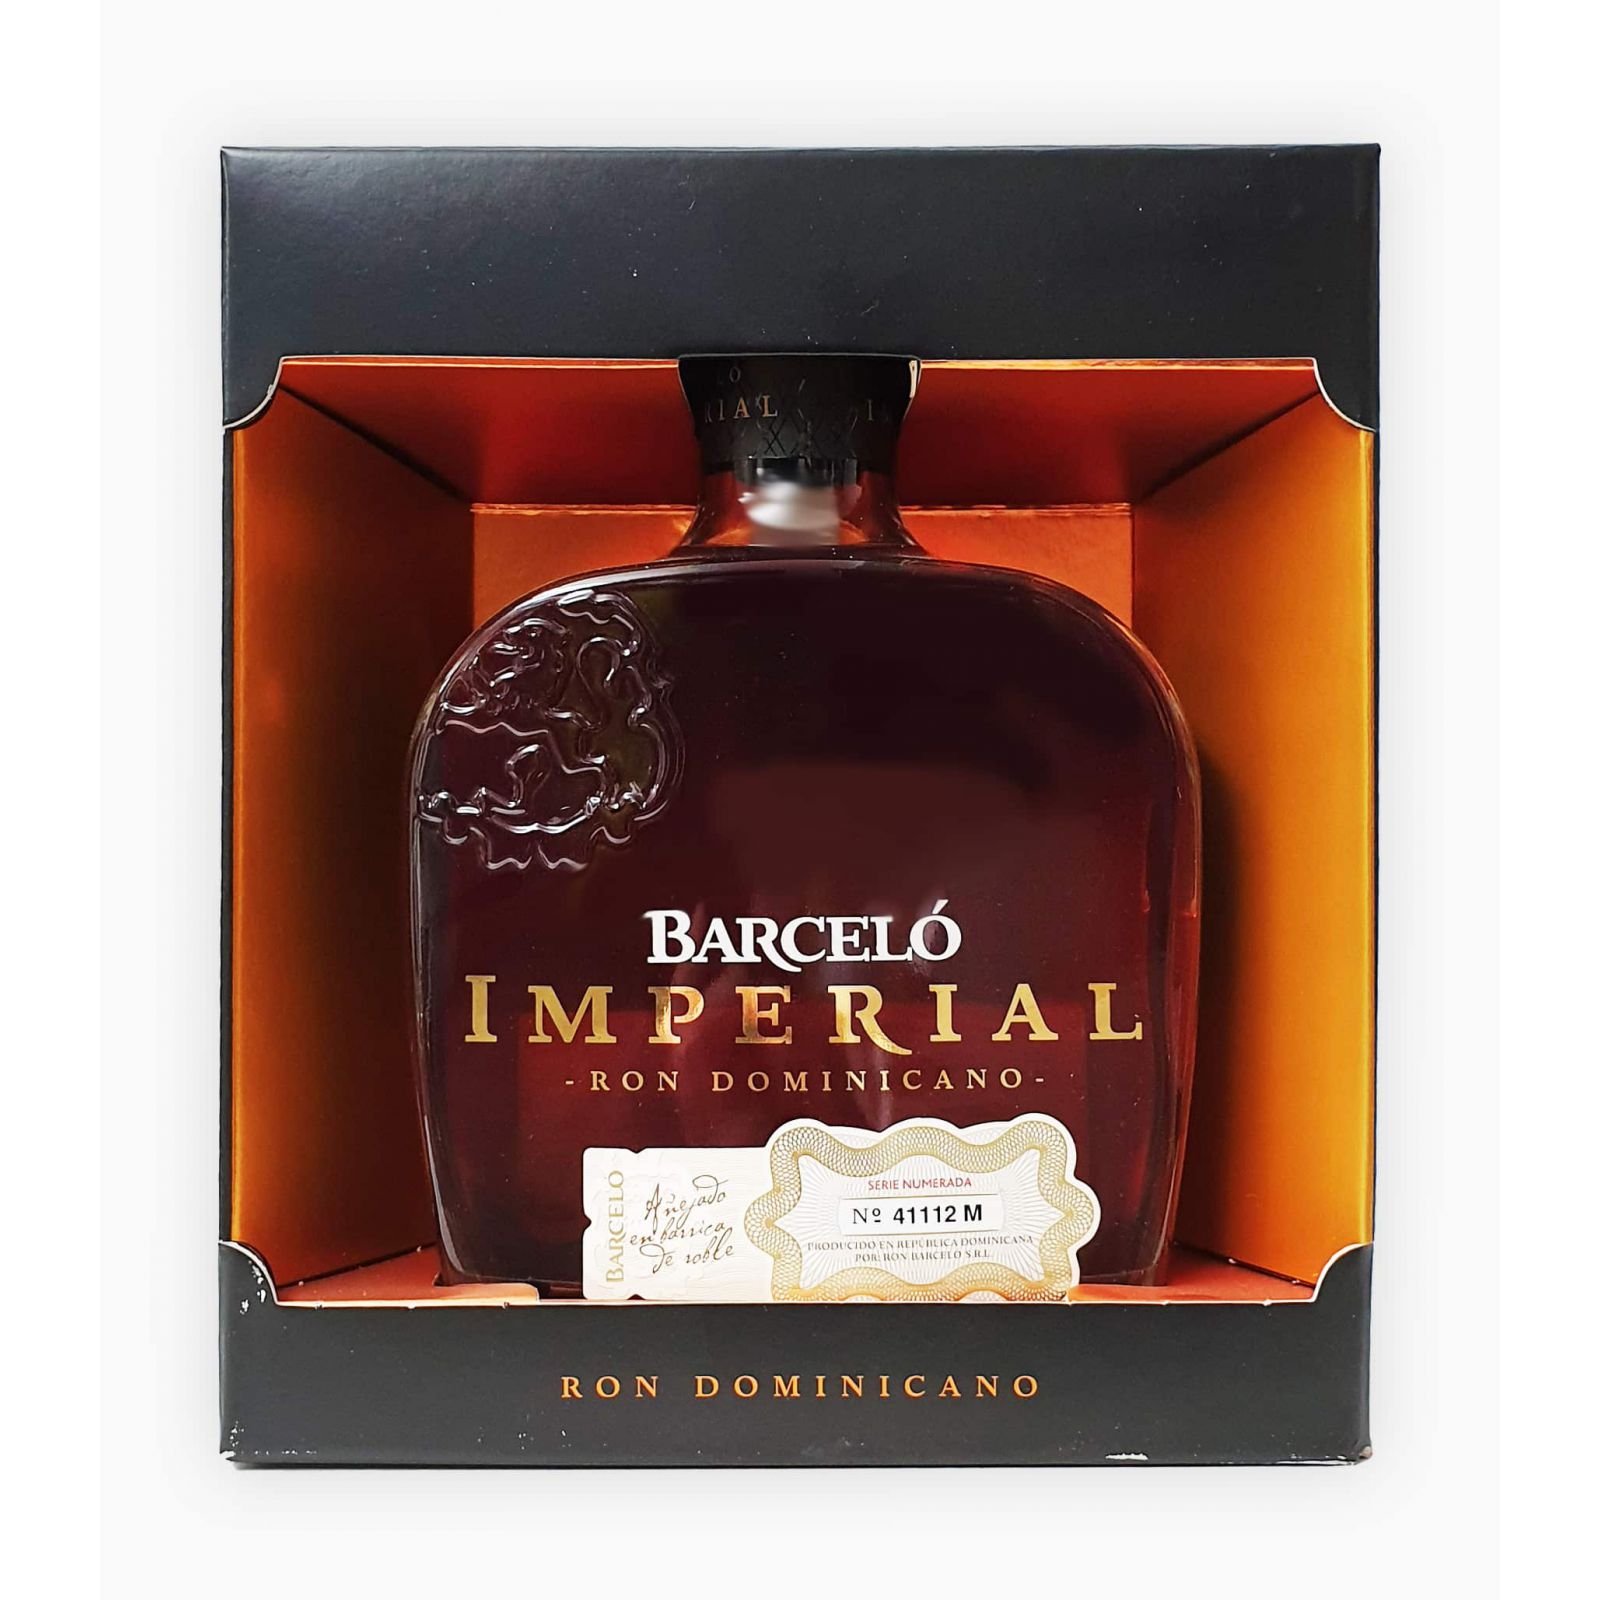 RUM BARCELO IMPERIAL - Drink Store